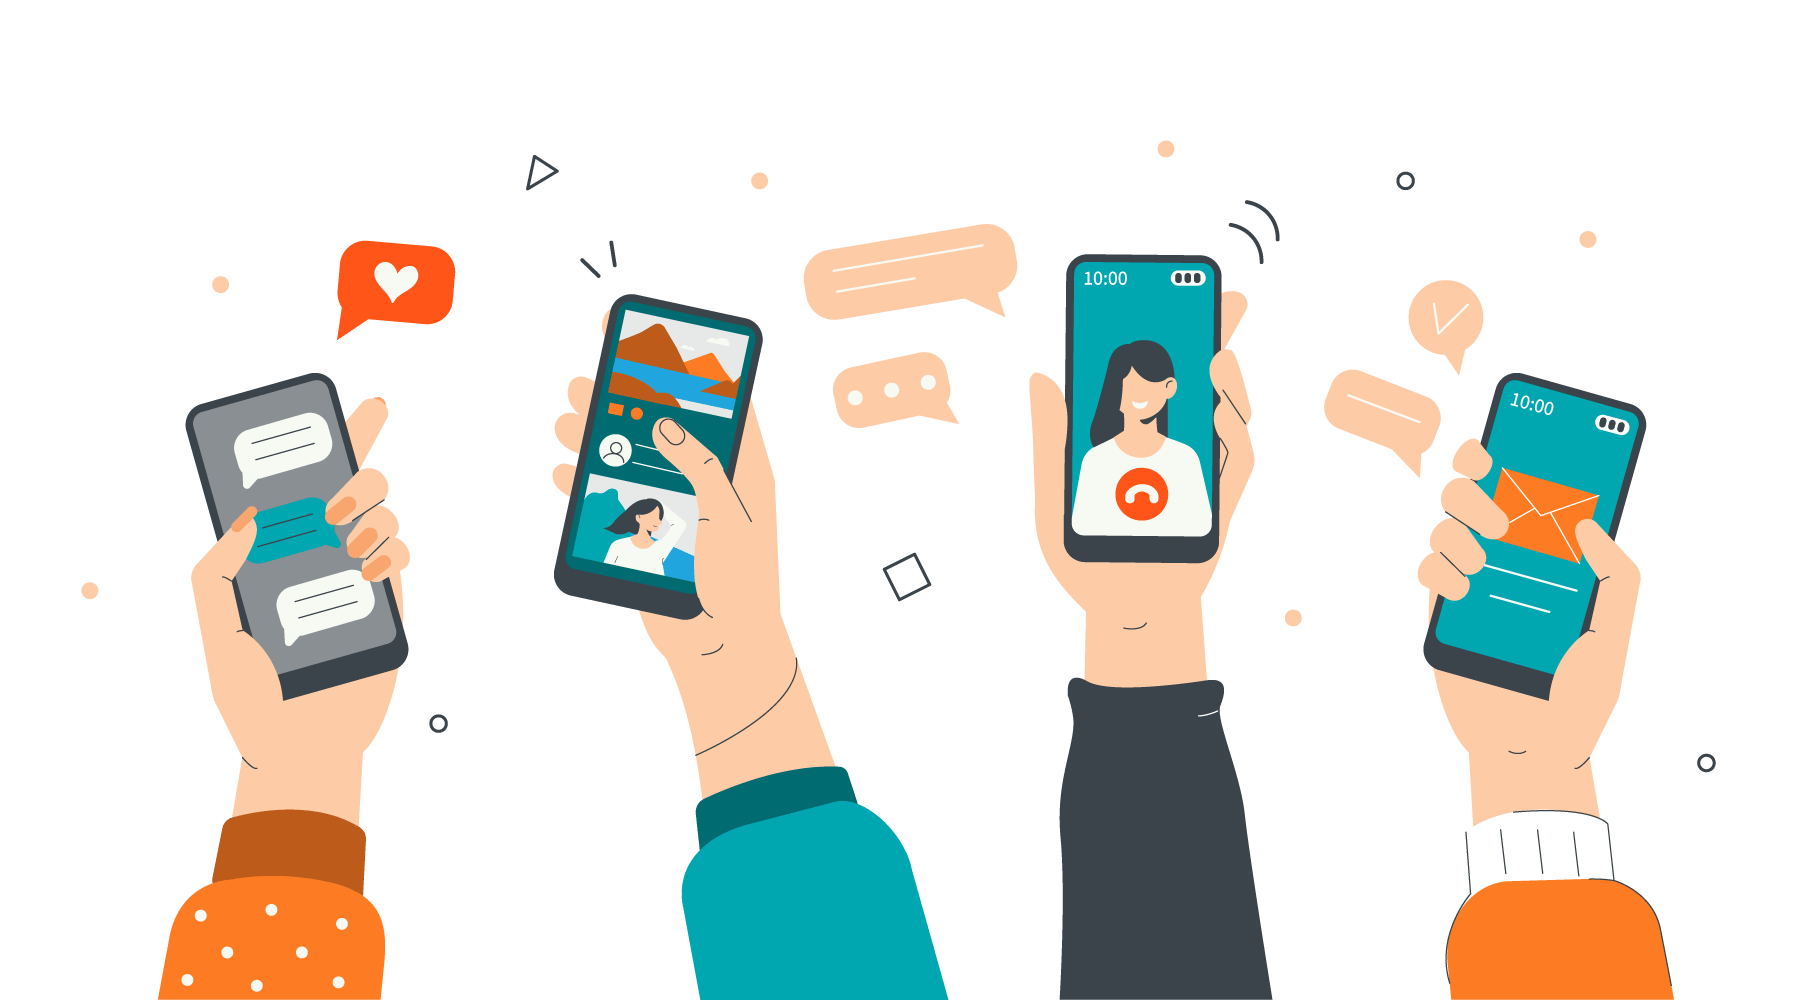 Flat vector image of four arms holding up smart phones. 